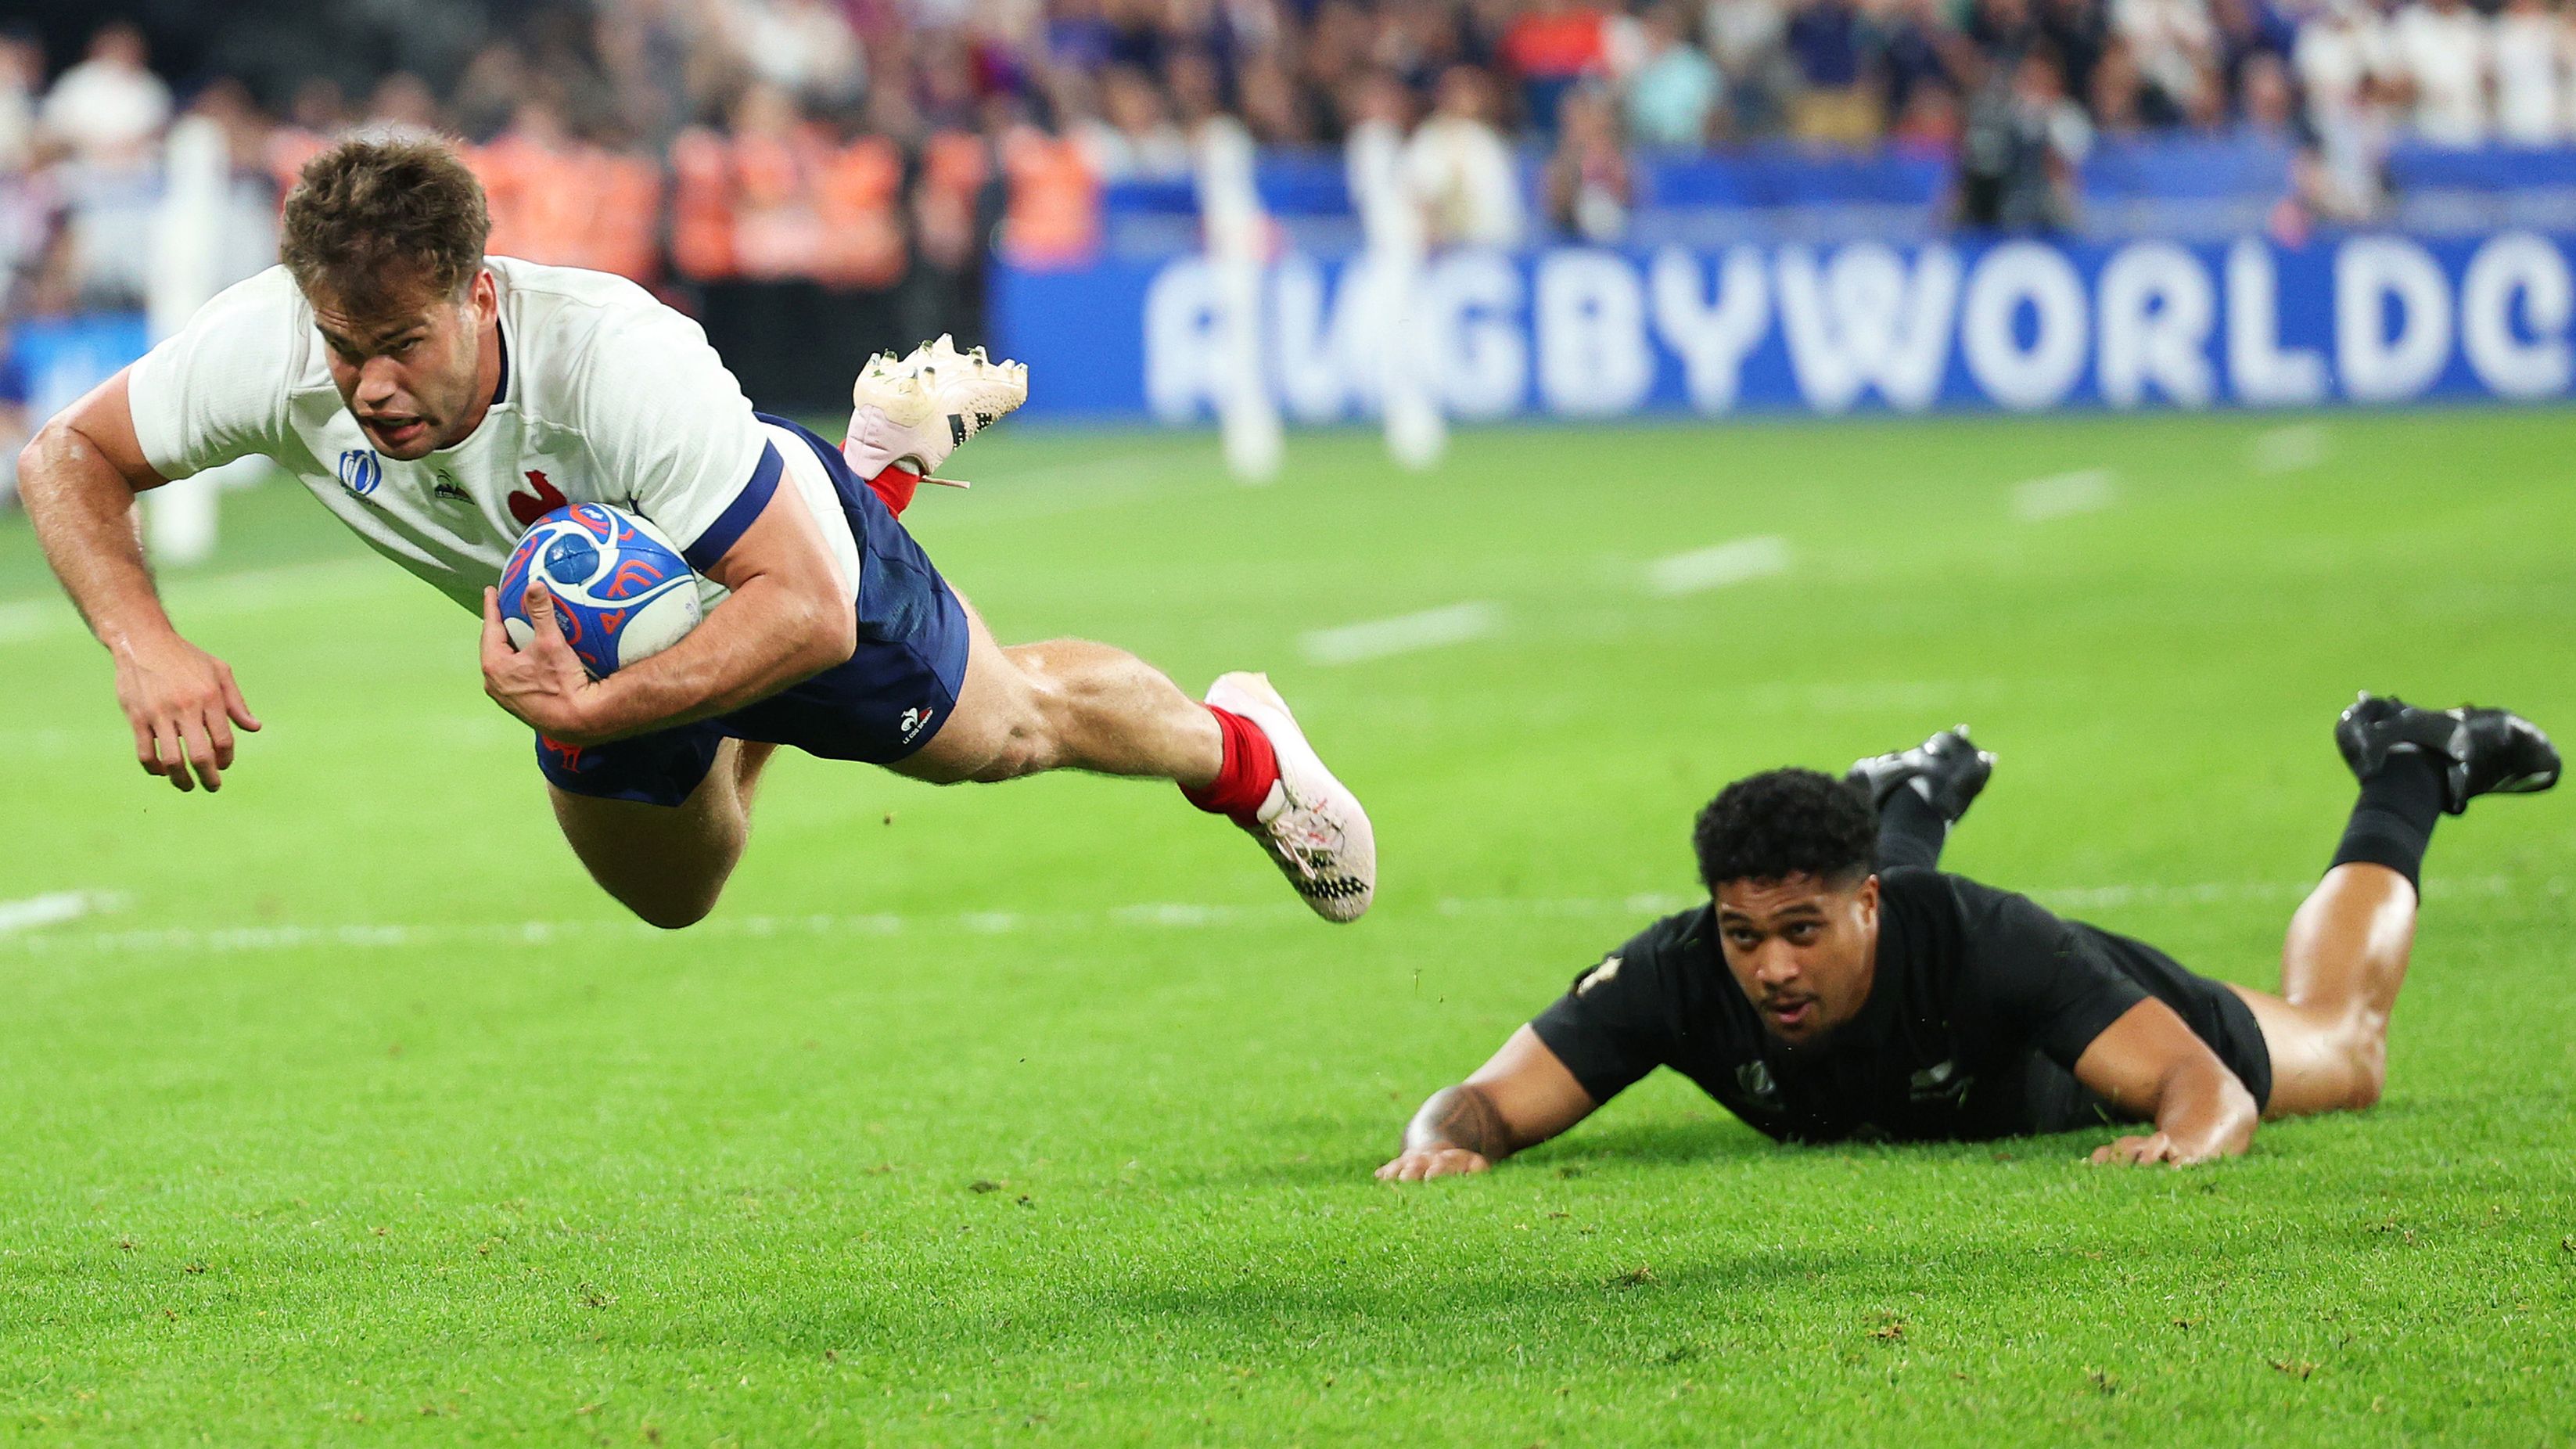 Damian Penaud of France breaking for the try line.